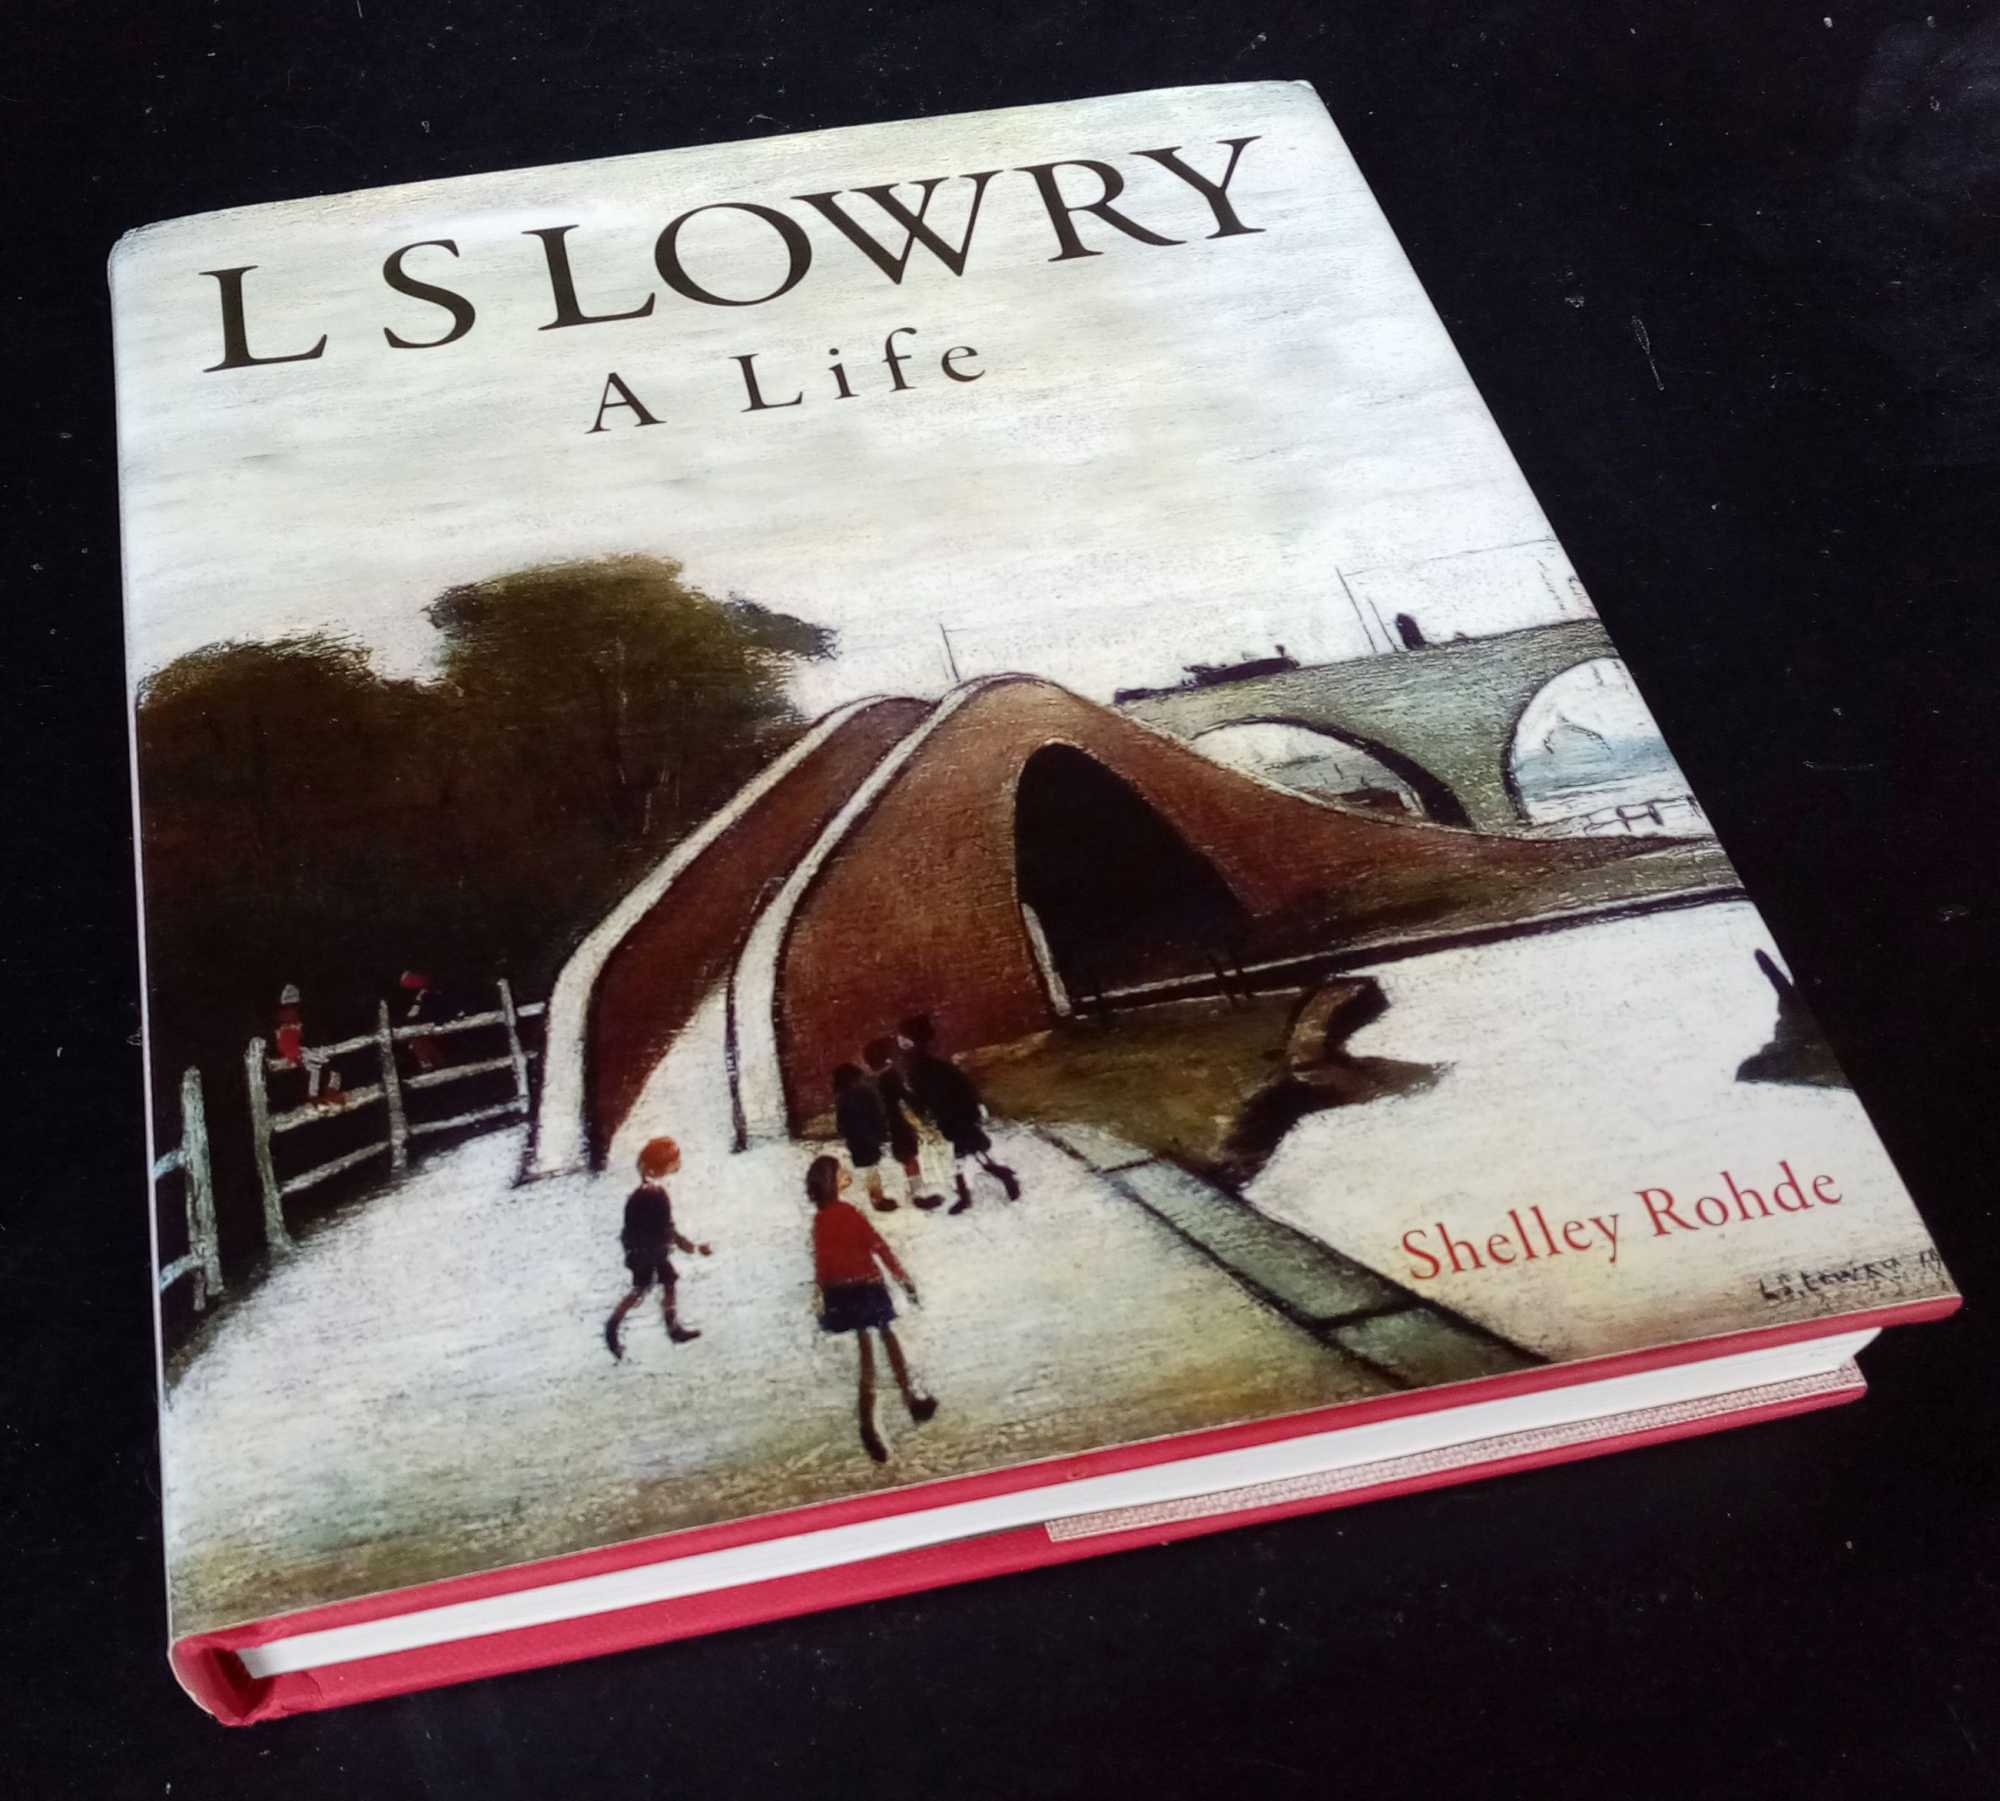 Shelley Rohde - L.S. Lowry: A Life